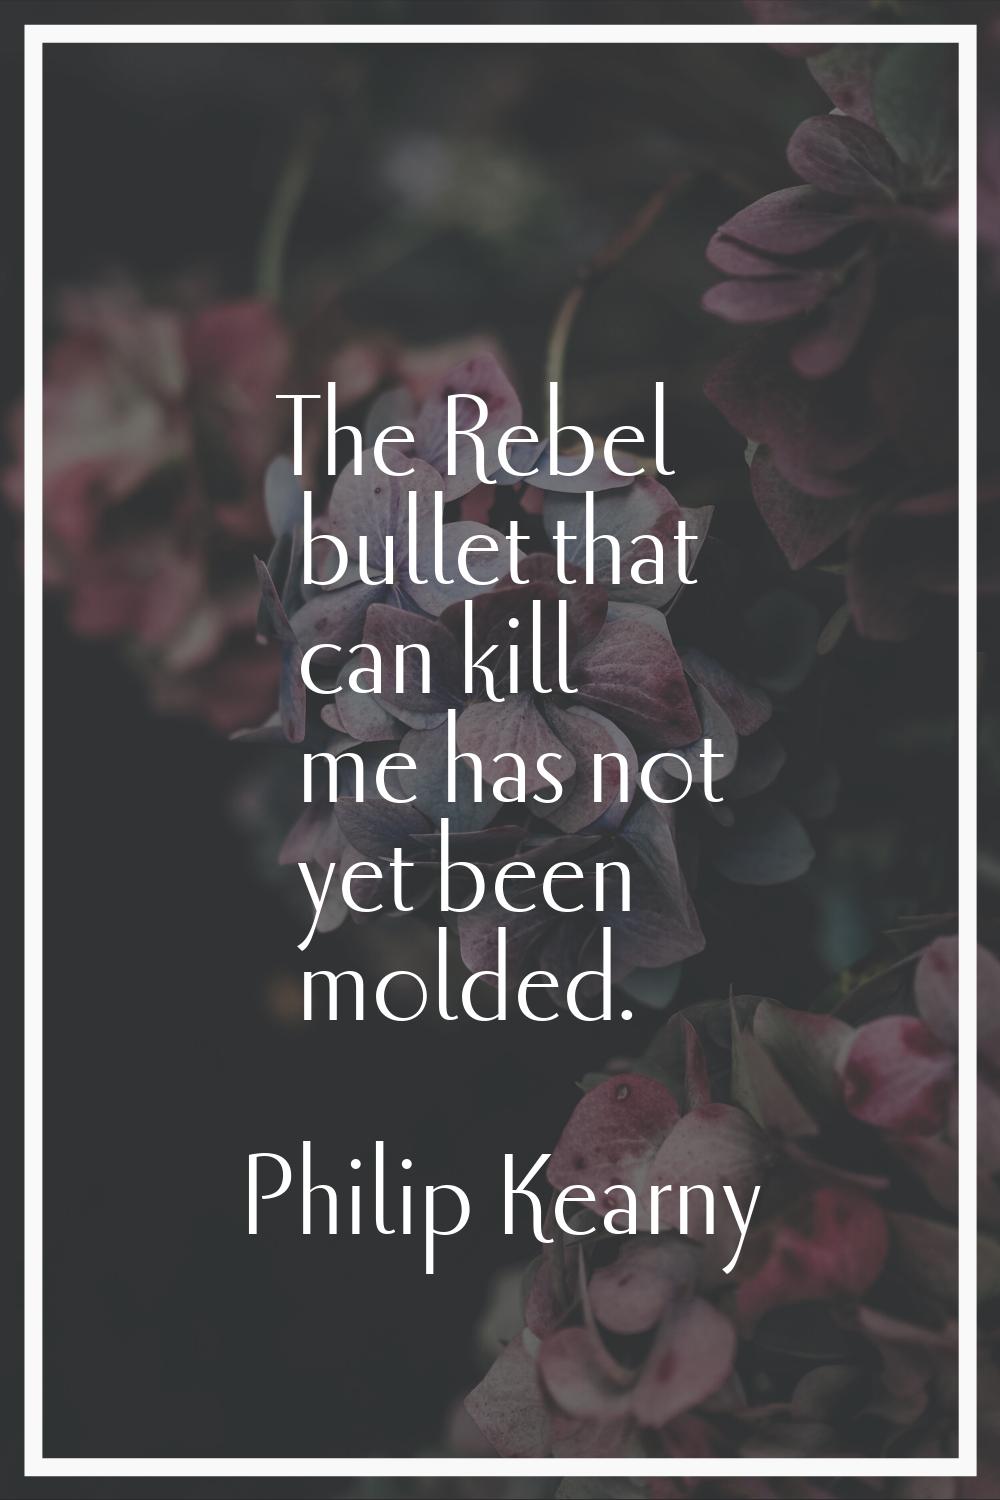 The Rebel bullet that can kill me has not yet been molded.